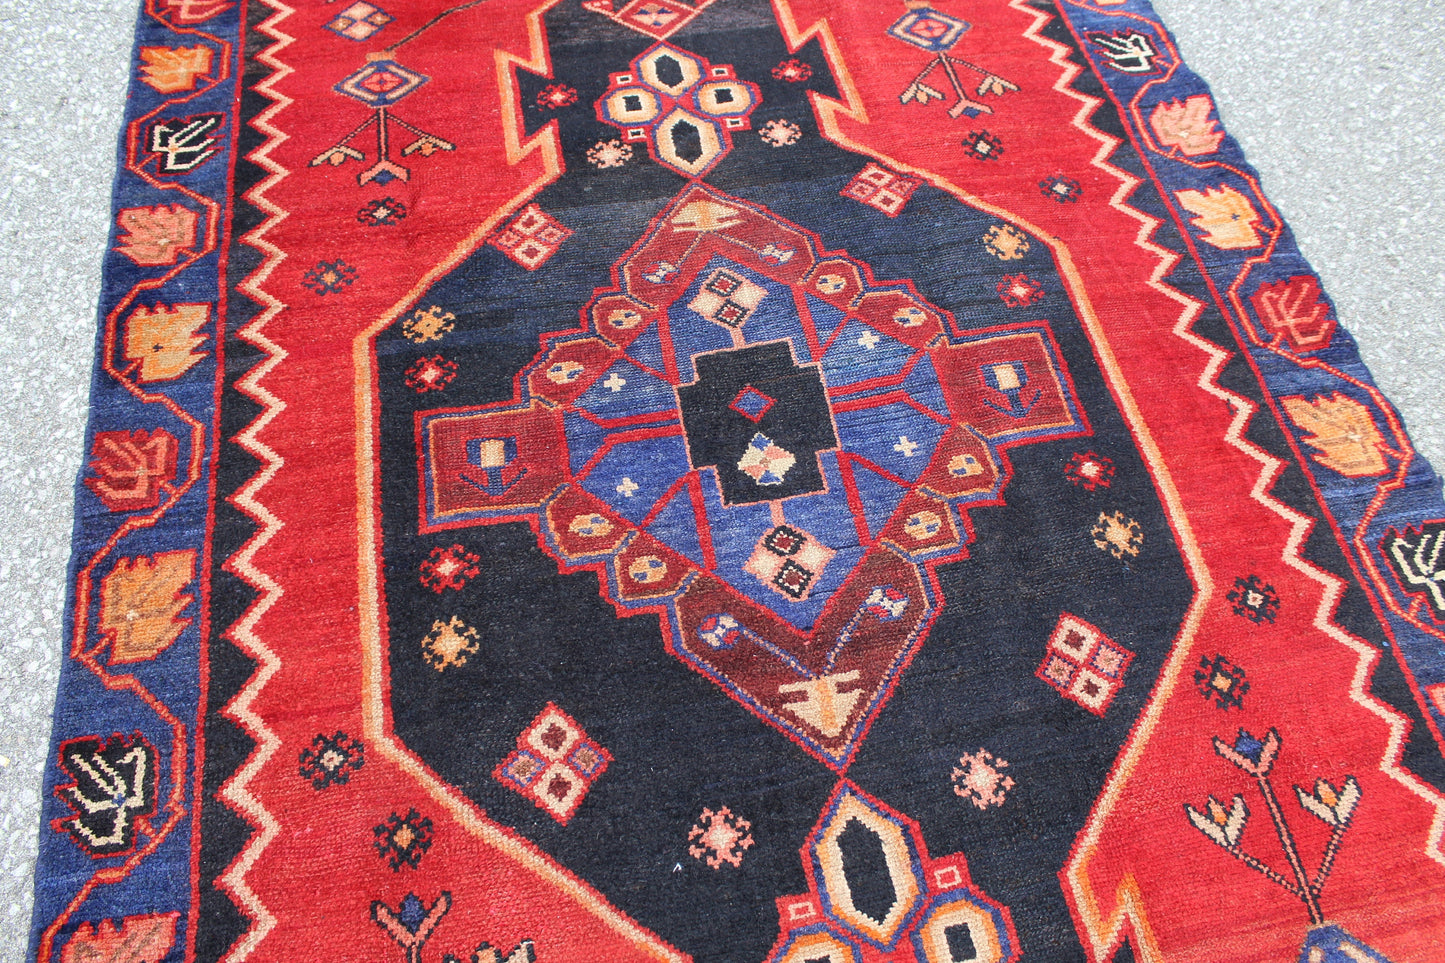 Red Tribal 4x6 Southwestern Style Area Rug with Blue Border